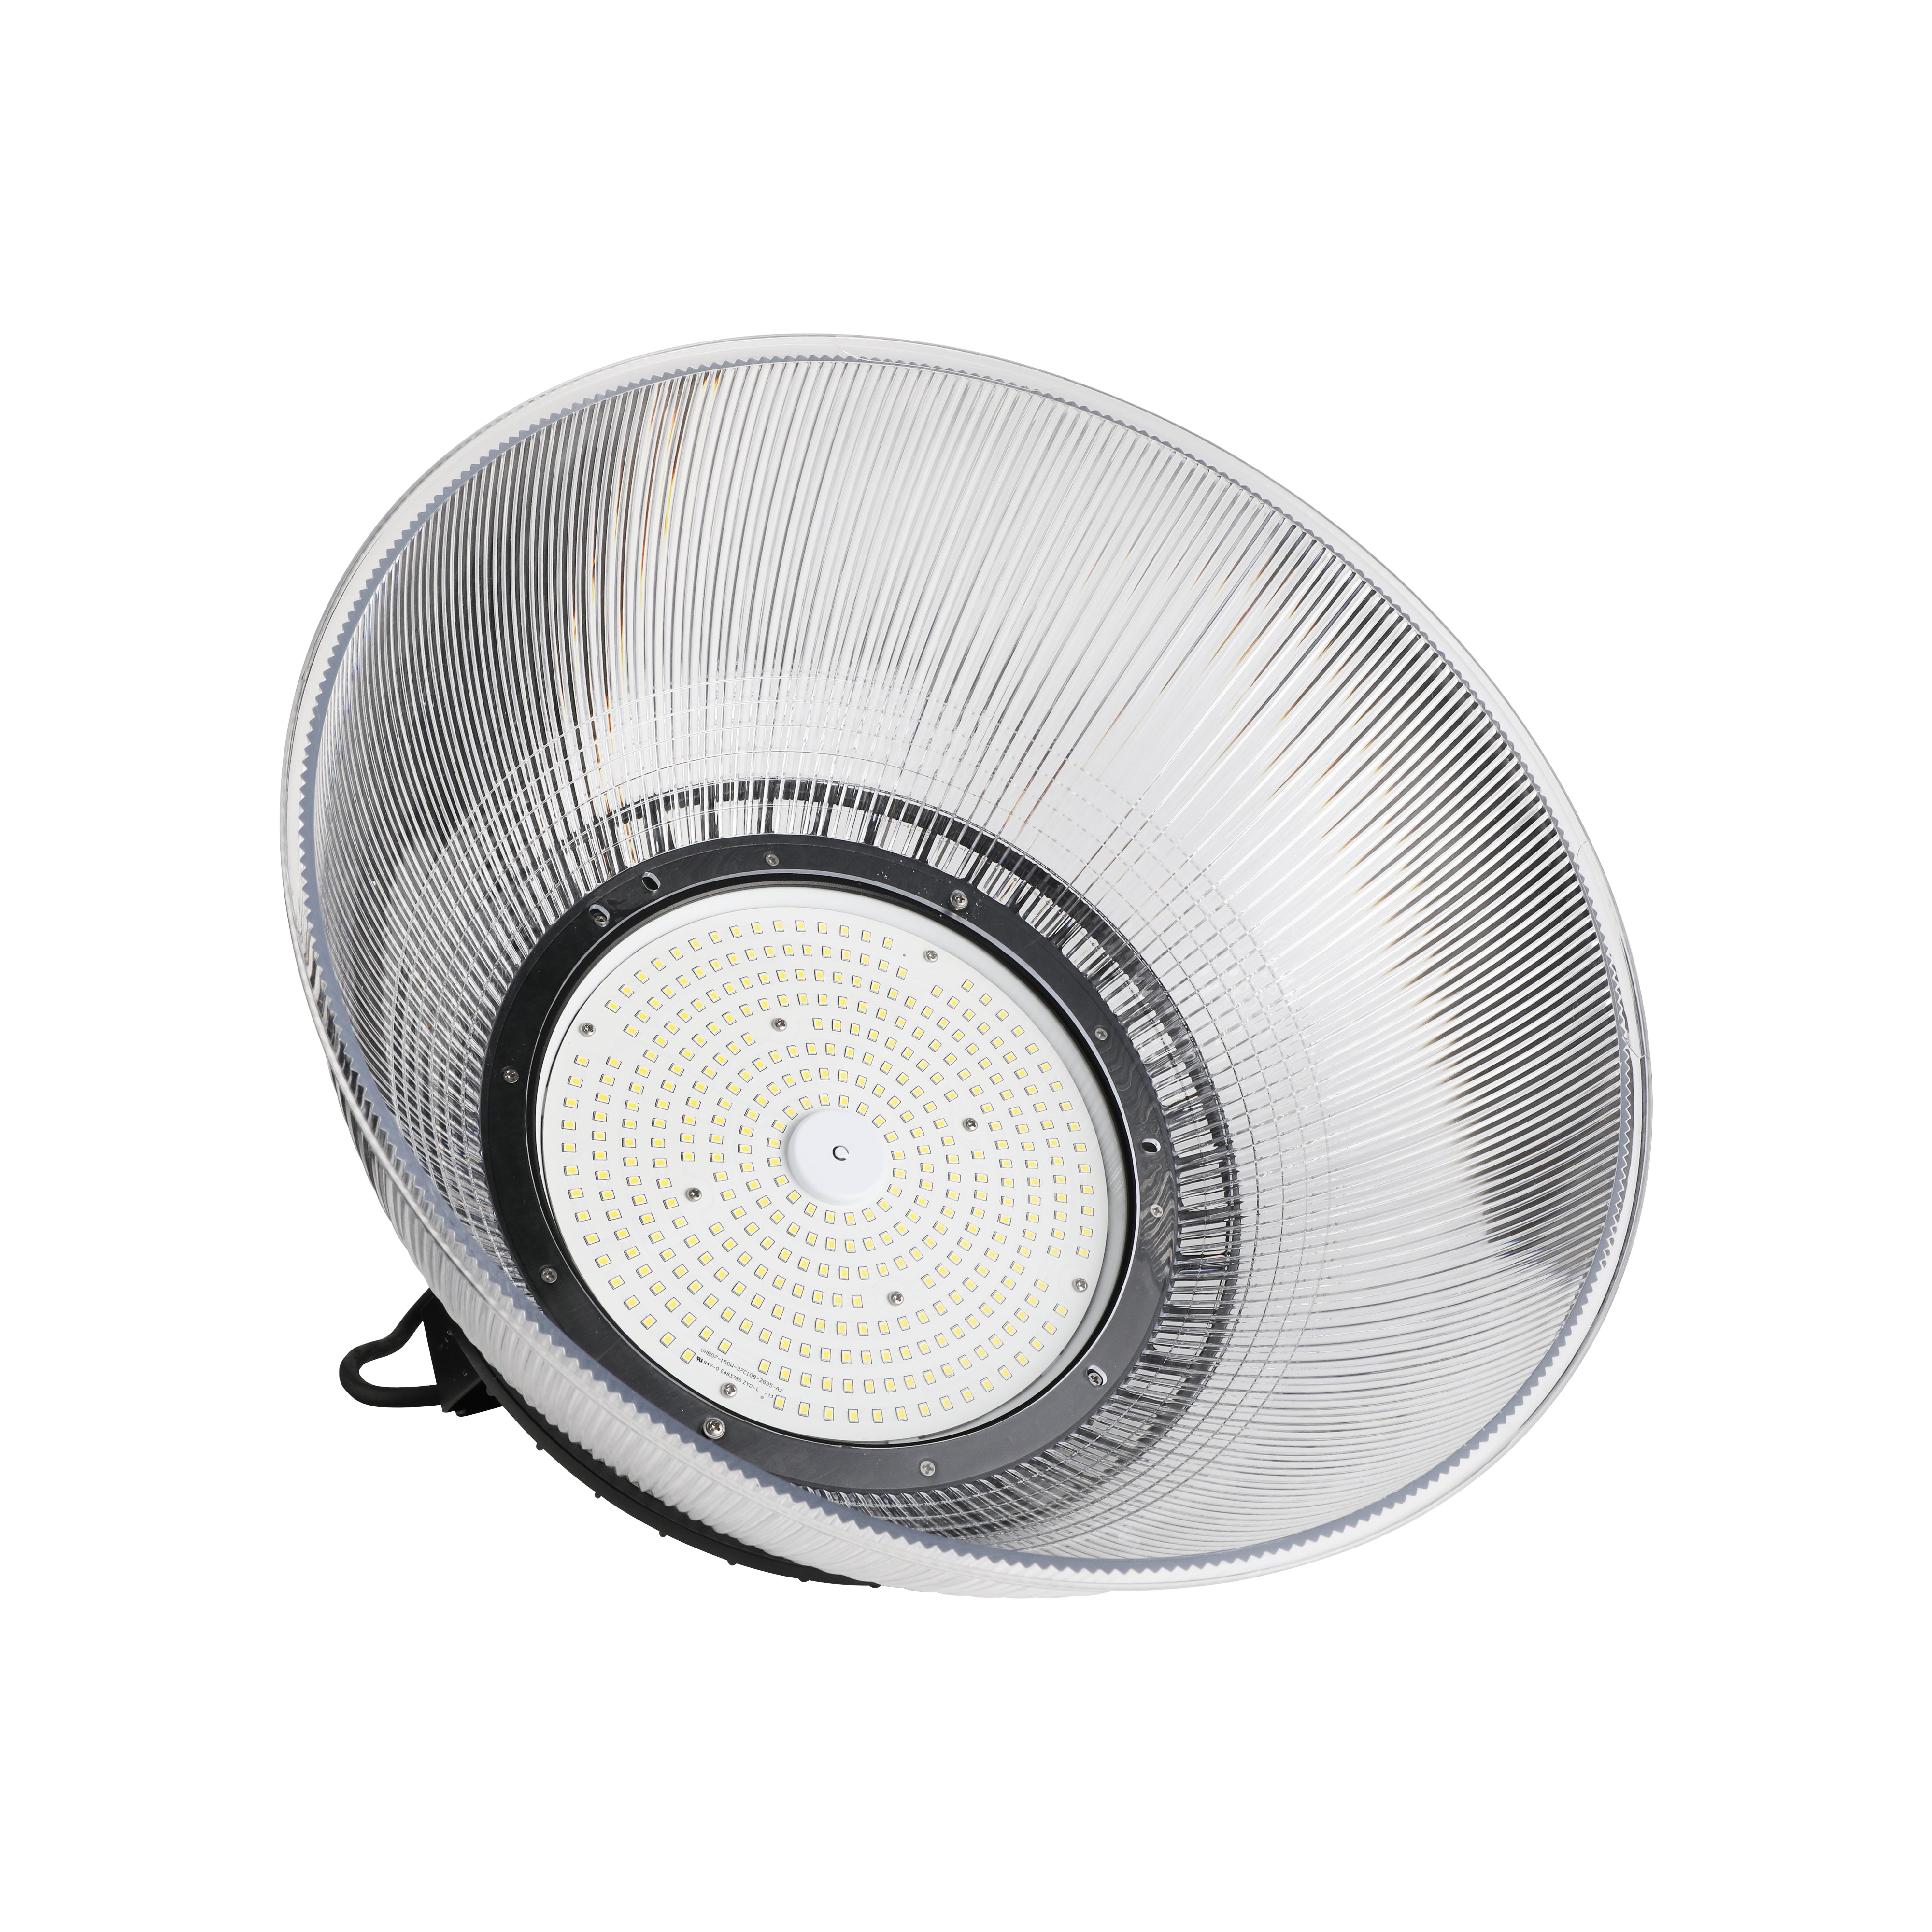 SkyForge 150W LED High Bay Light Fixture with Shade